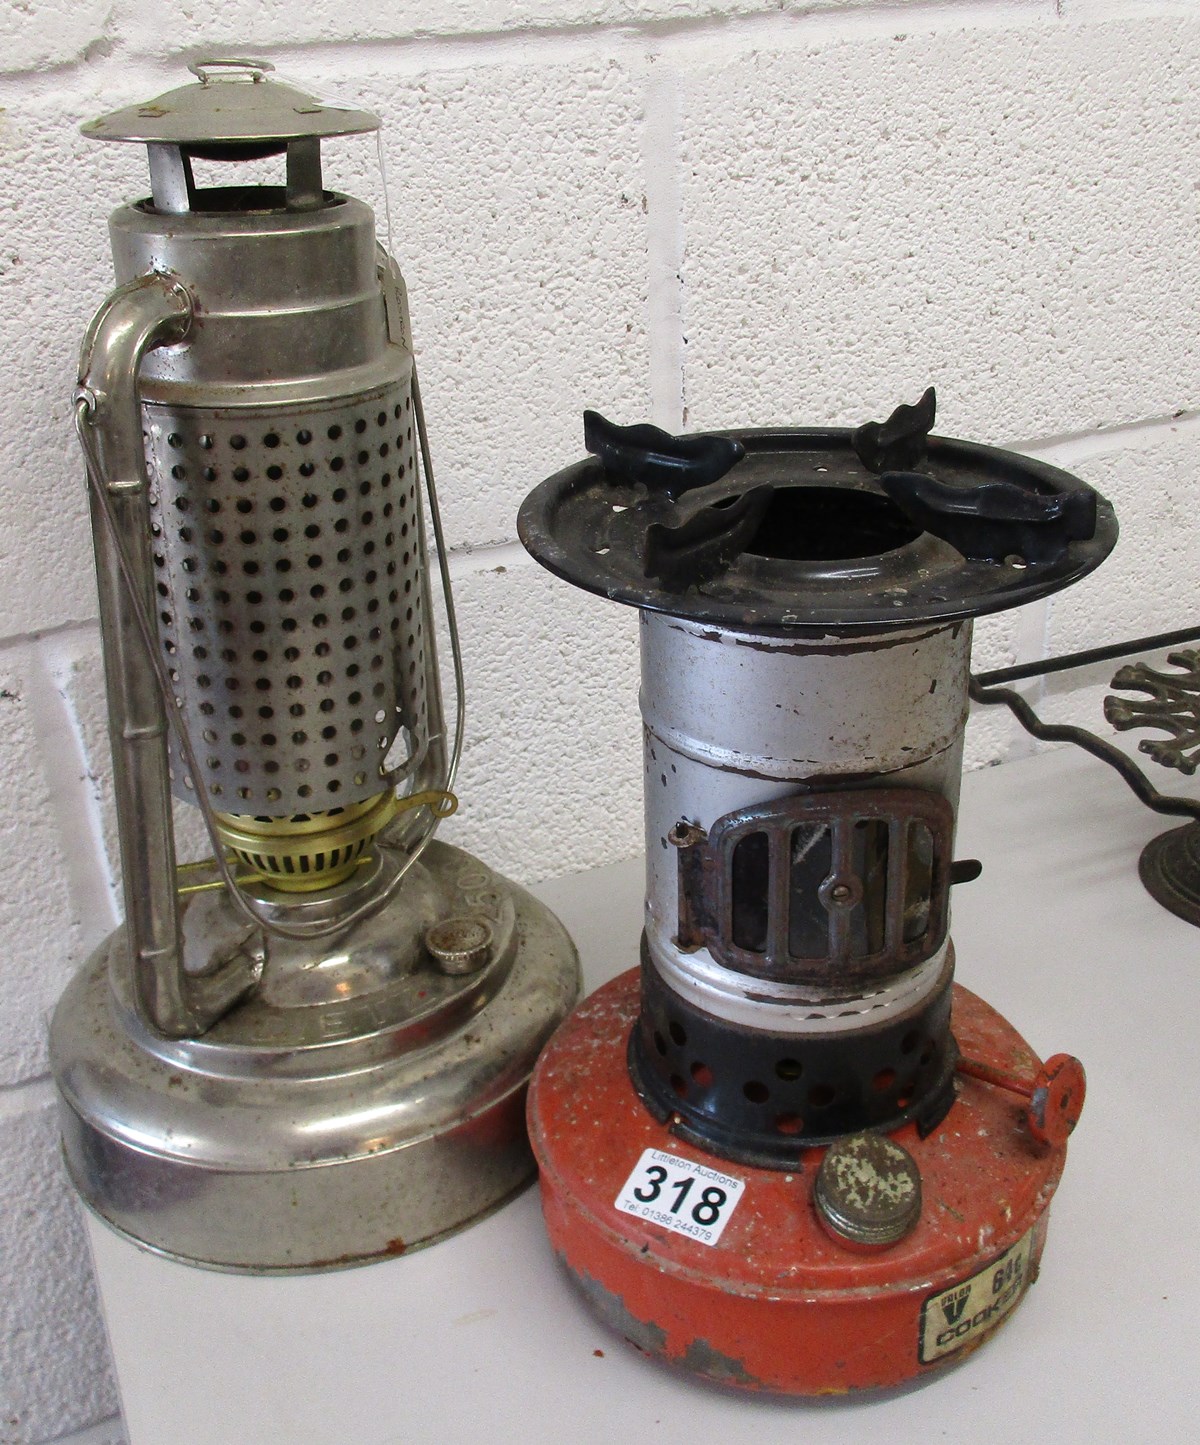 Hurricane lamp and camping cooker